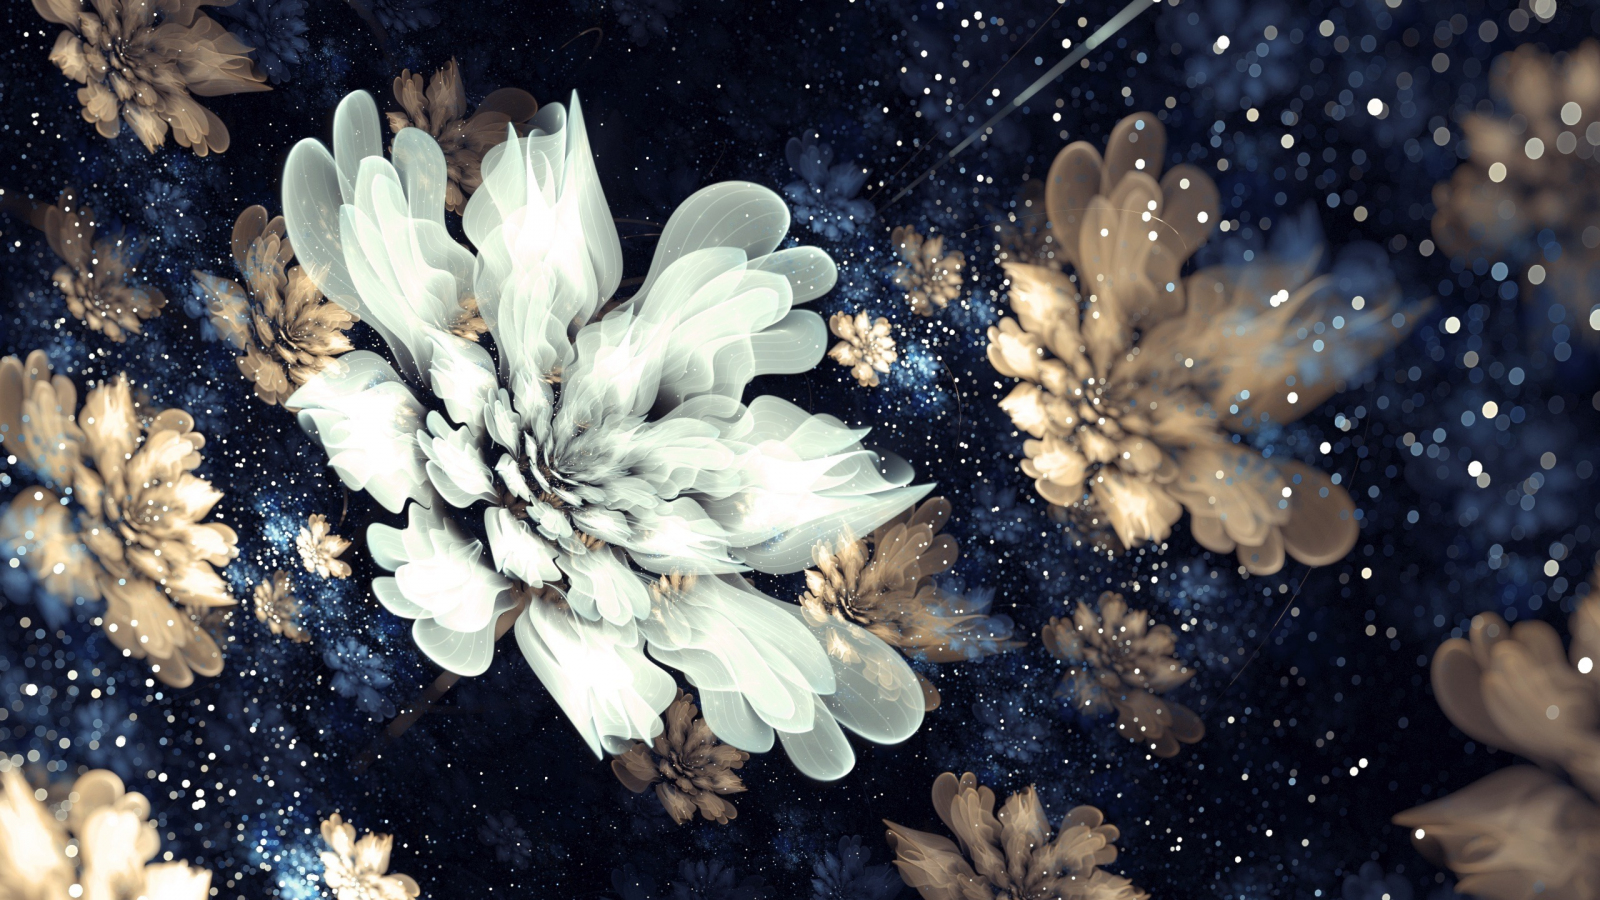 Download wallpaper 1600x900 floral, pattern, fractal, abstract, flowers,  16:9 widescreen 1600x900 hd background, 2838